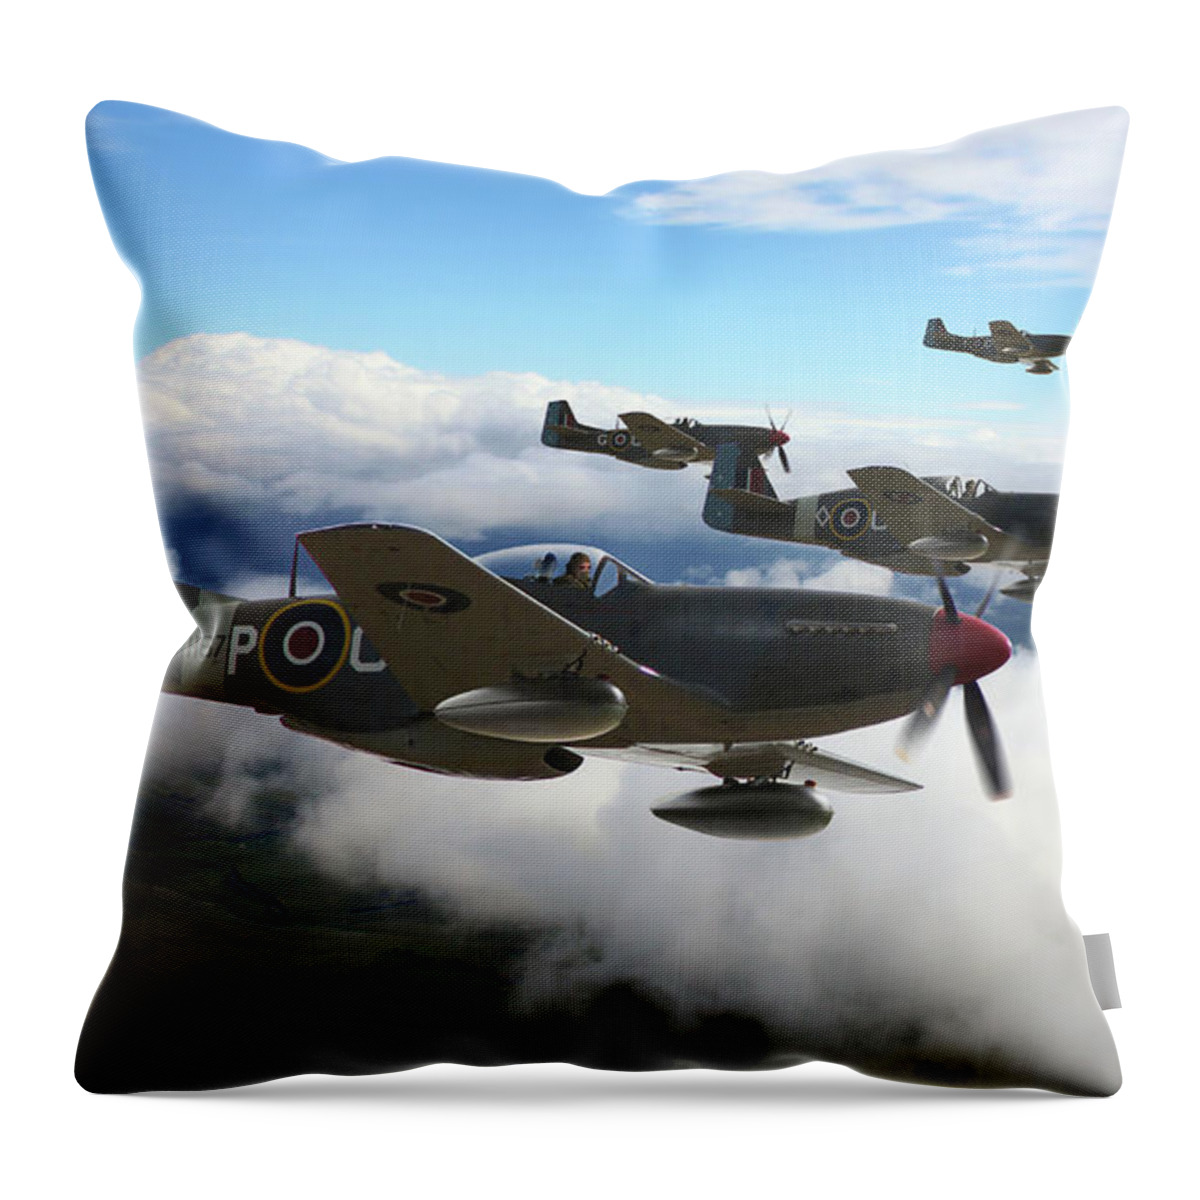 Raaf Throw Pillow featuring the digital art Southern Cross Mustangs by Mark Donoghue